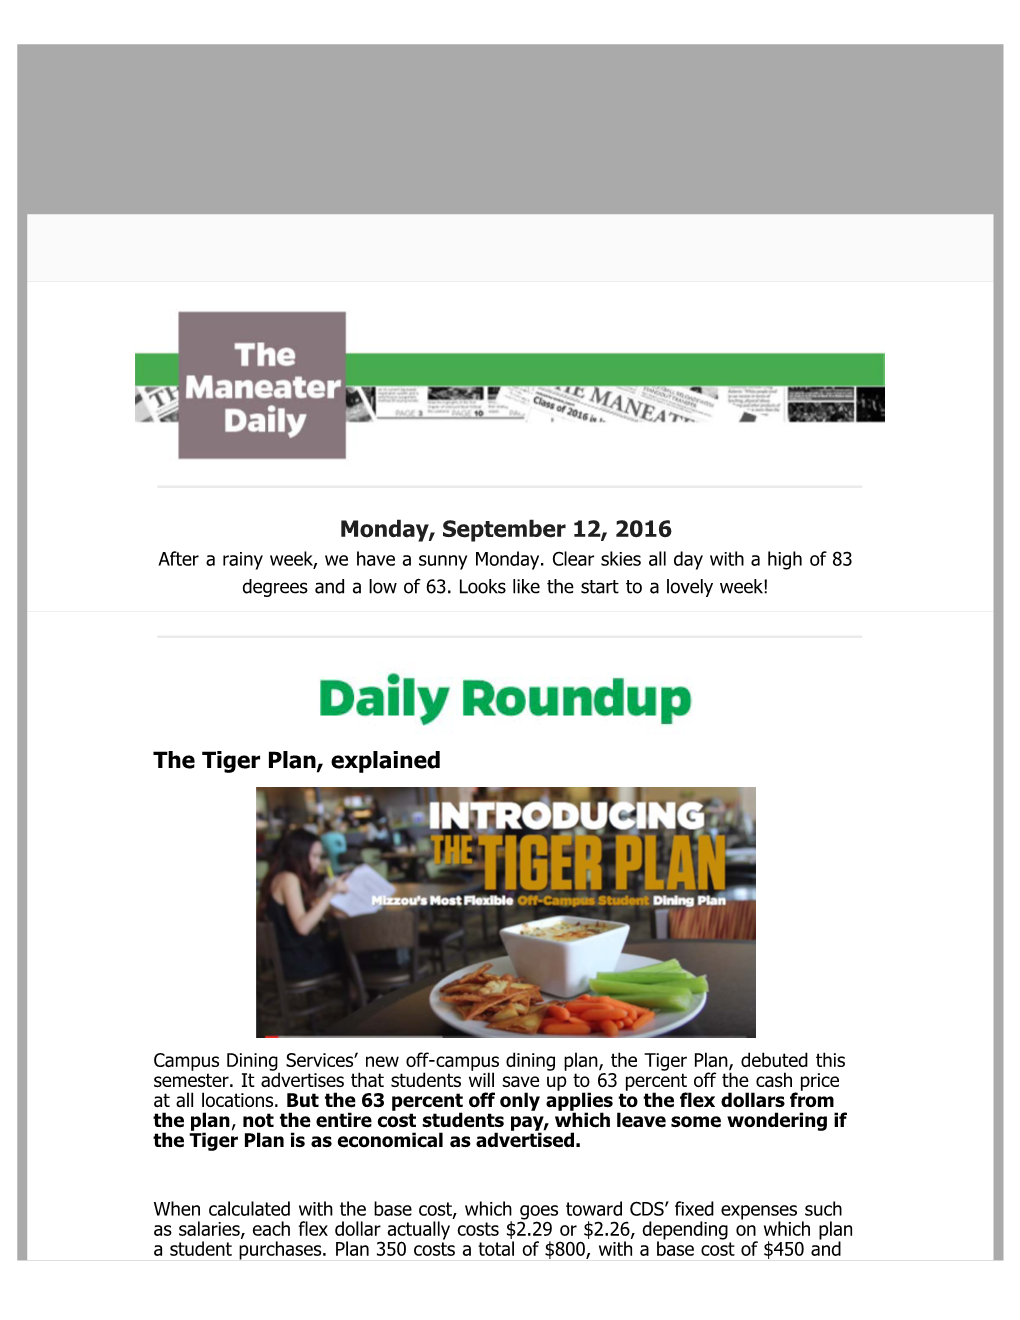 Monday, September 12, 2016 the Tiger Plan, Explained